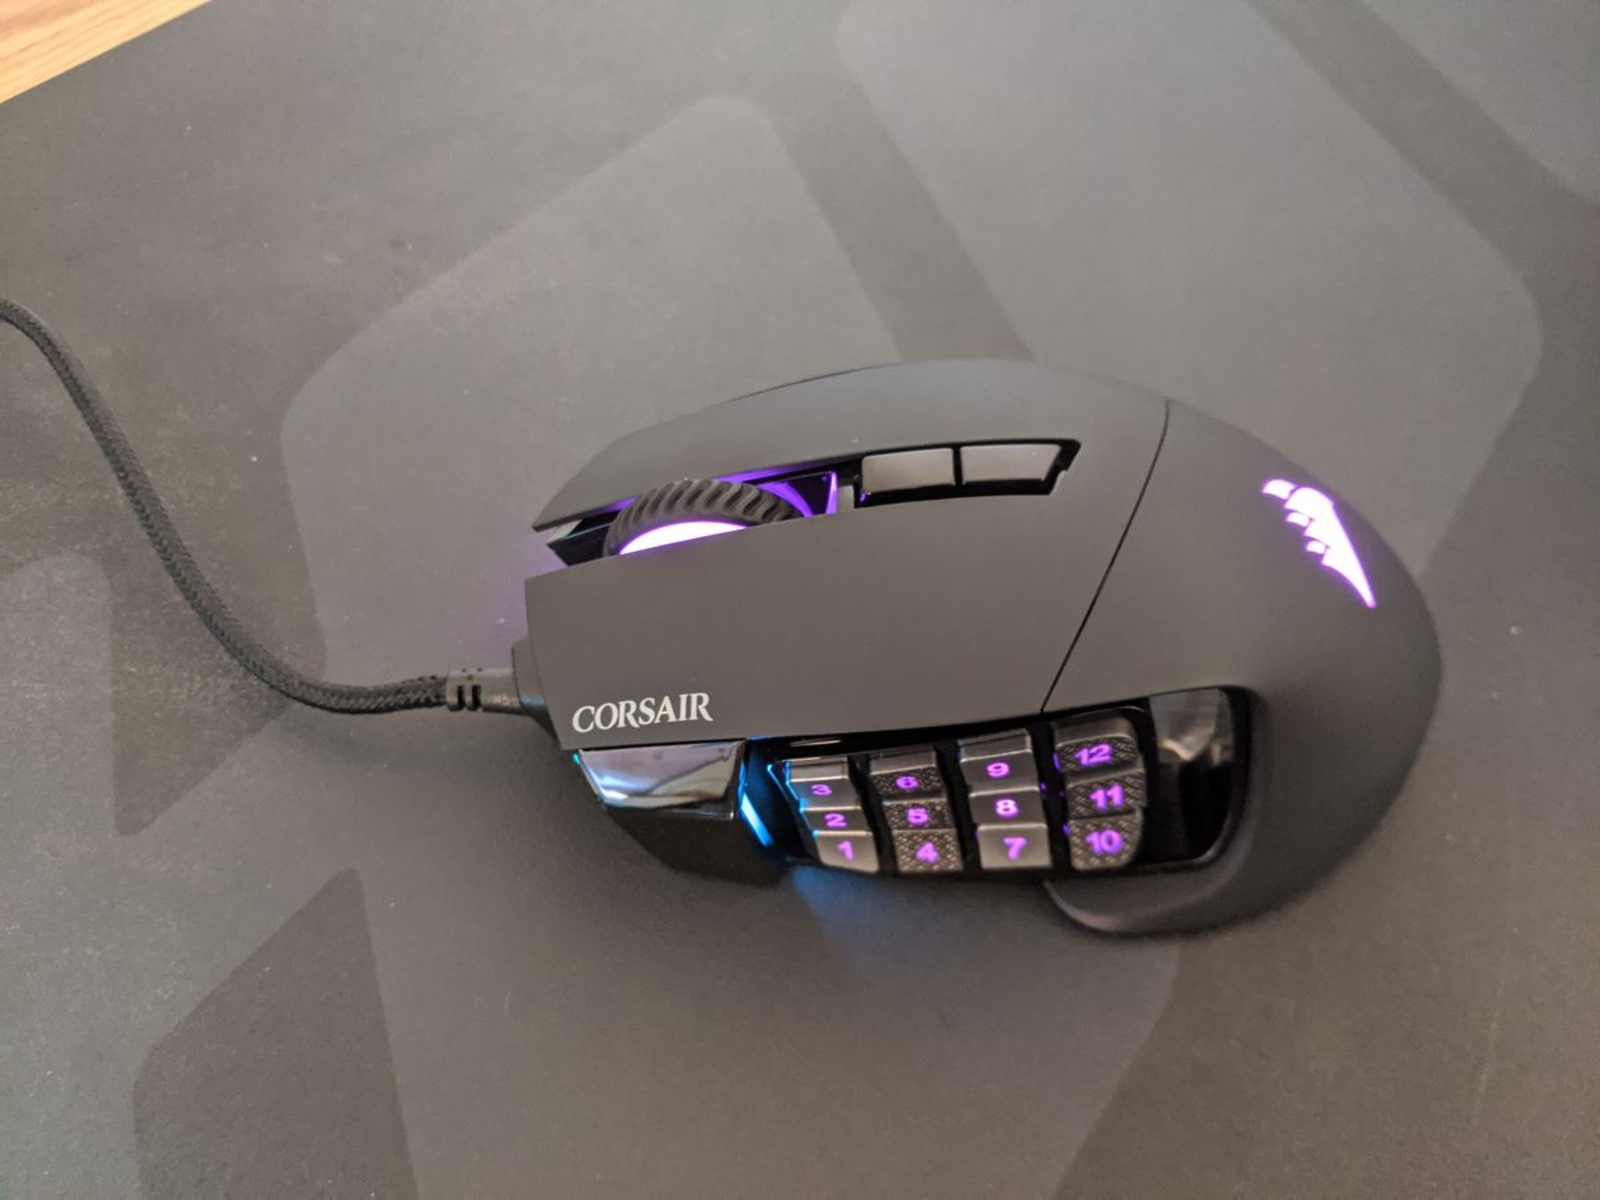 How to Make a Macro with Corsair Gaming Mouse | Robots.net